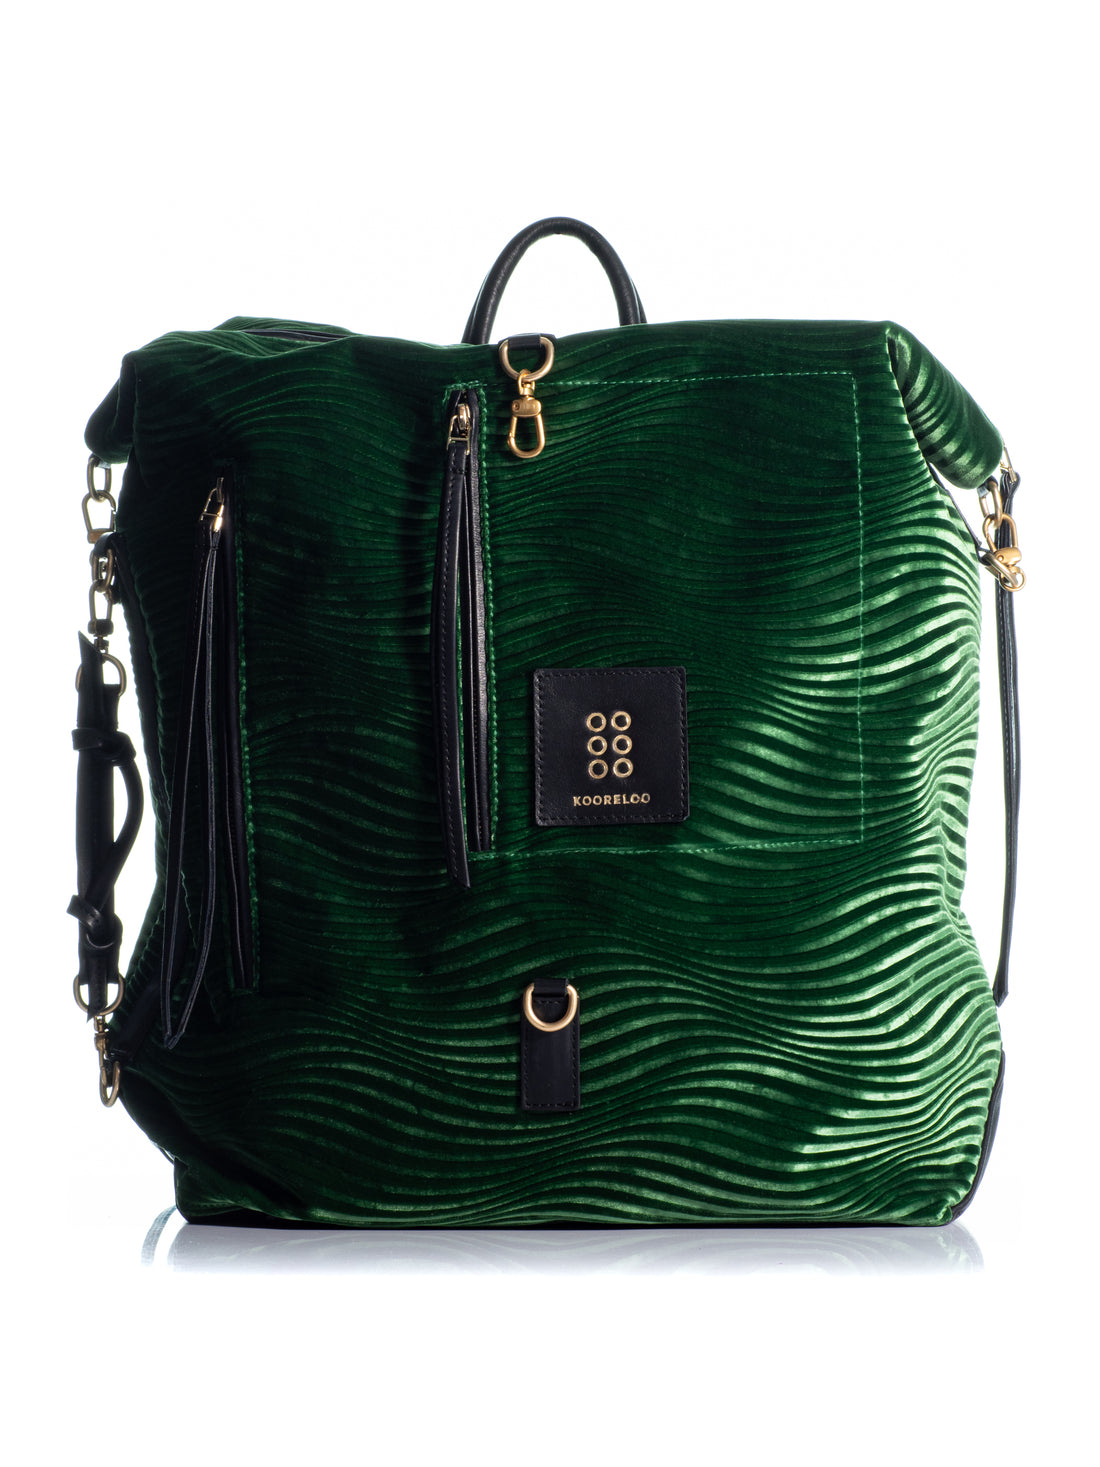 The Florence Backpack